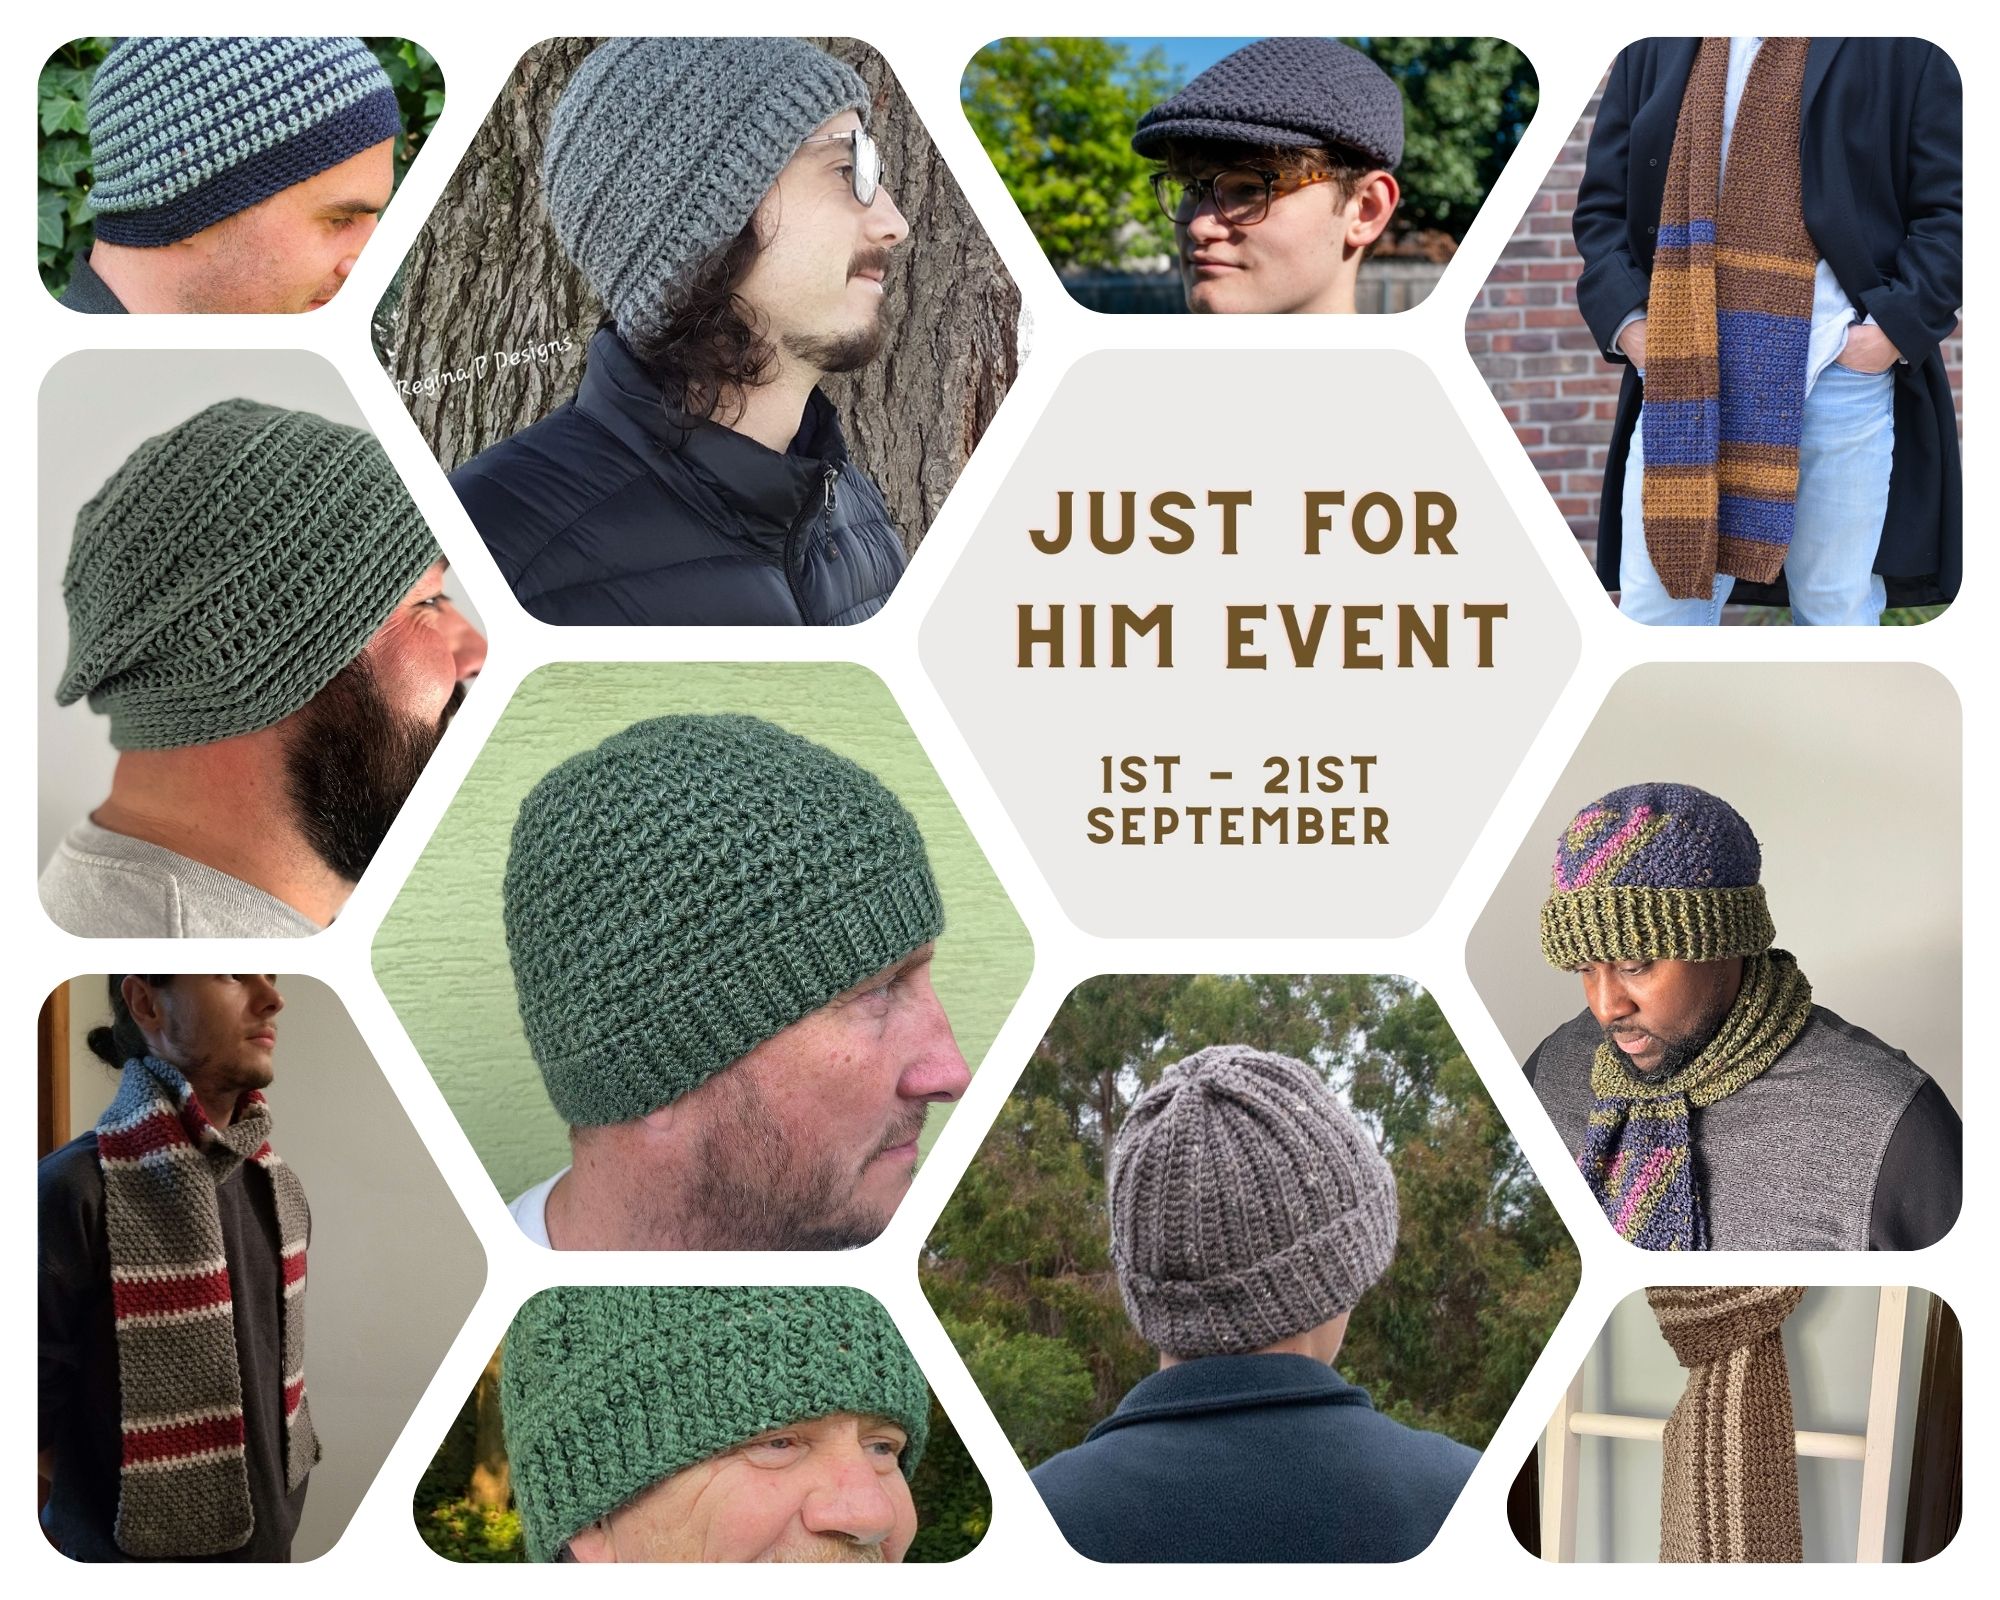 A picture collage for the Just for him Event featuring crochet hat for men and crochet scarves.